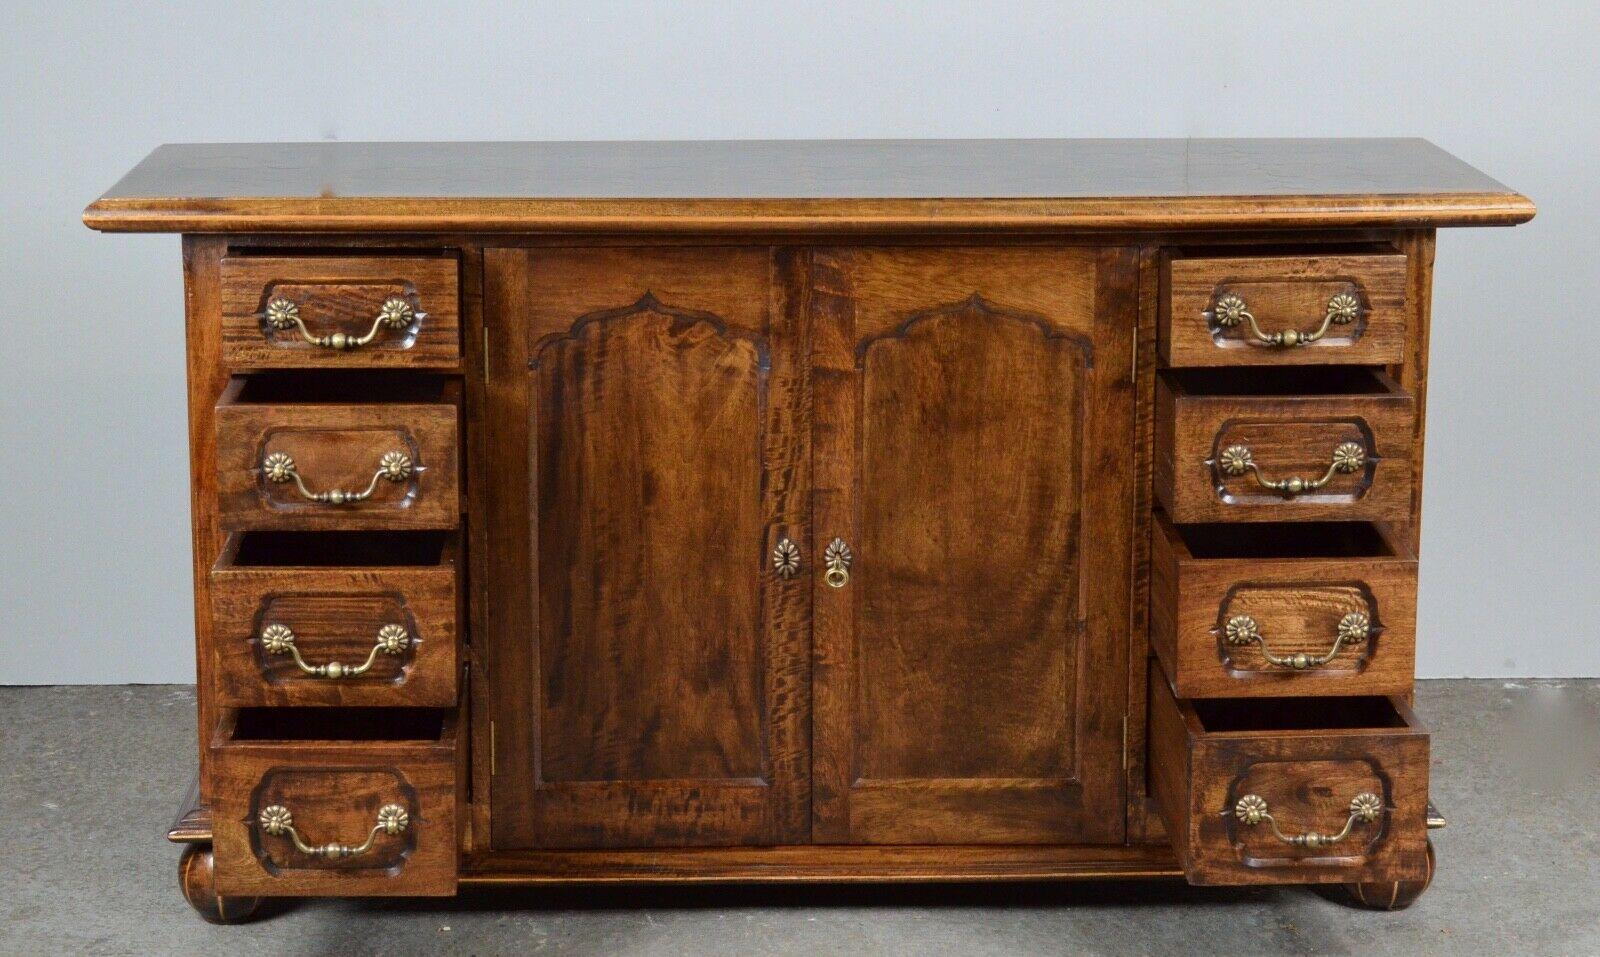 20th Century Quality Antique Walnut Parquetry Inlaid Hardwood Sideboard /Table&Ch Available For Sale